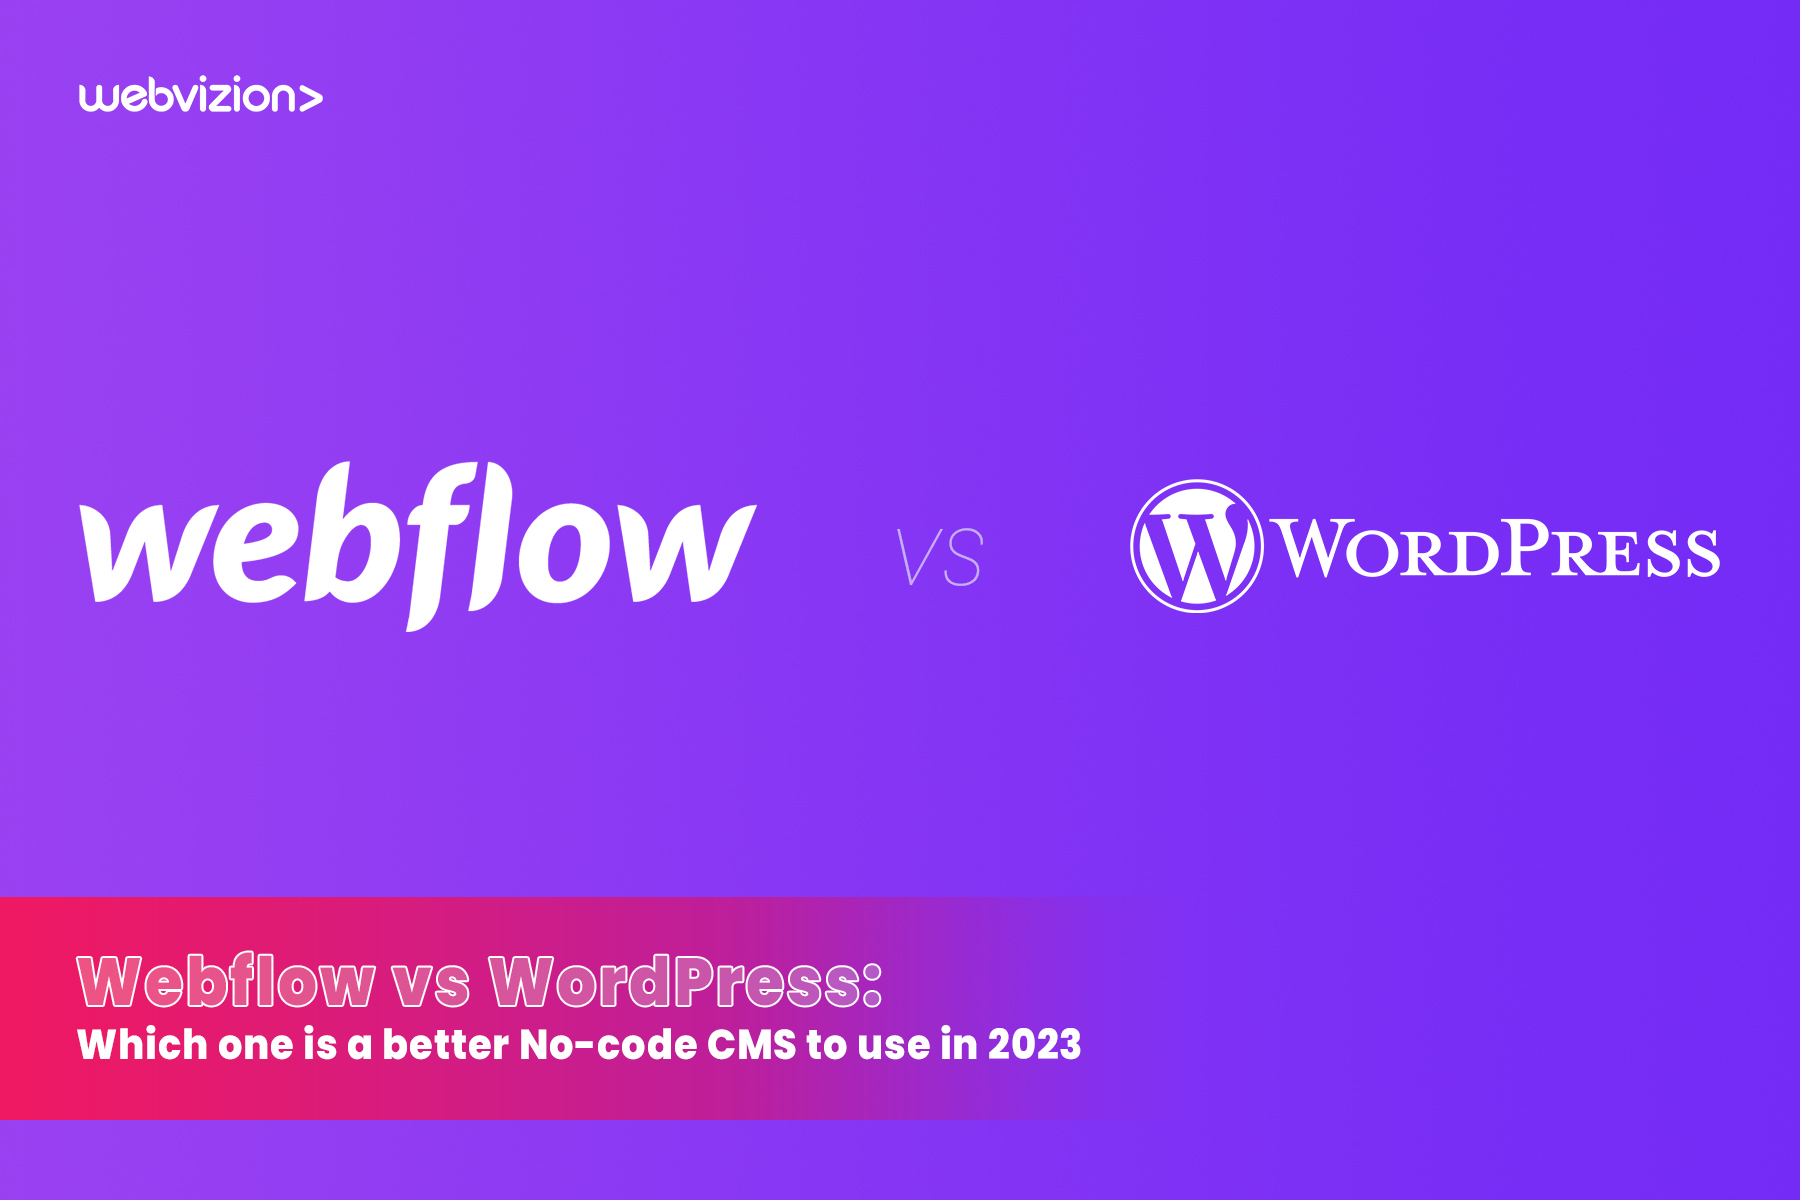 Webflow-vs-WordPress-Which-one-is-a-better-No-code-CMS-to-use-in-2023-Webvizion-Global